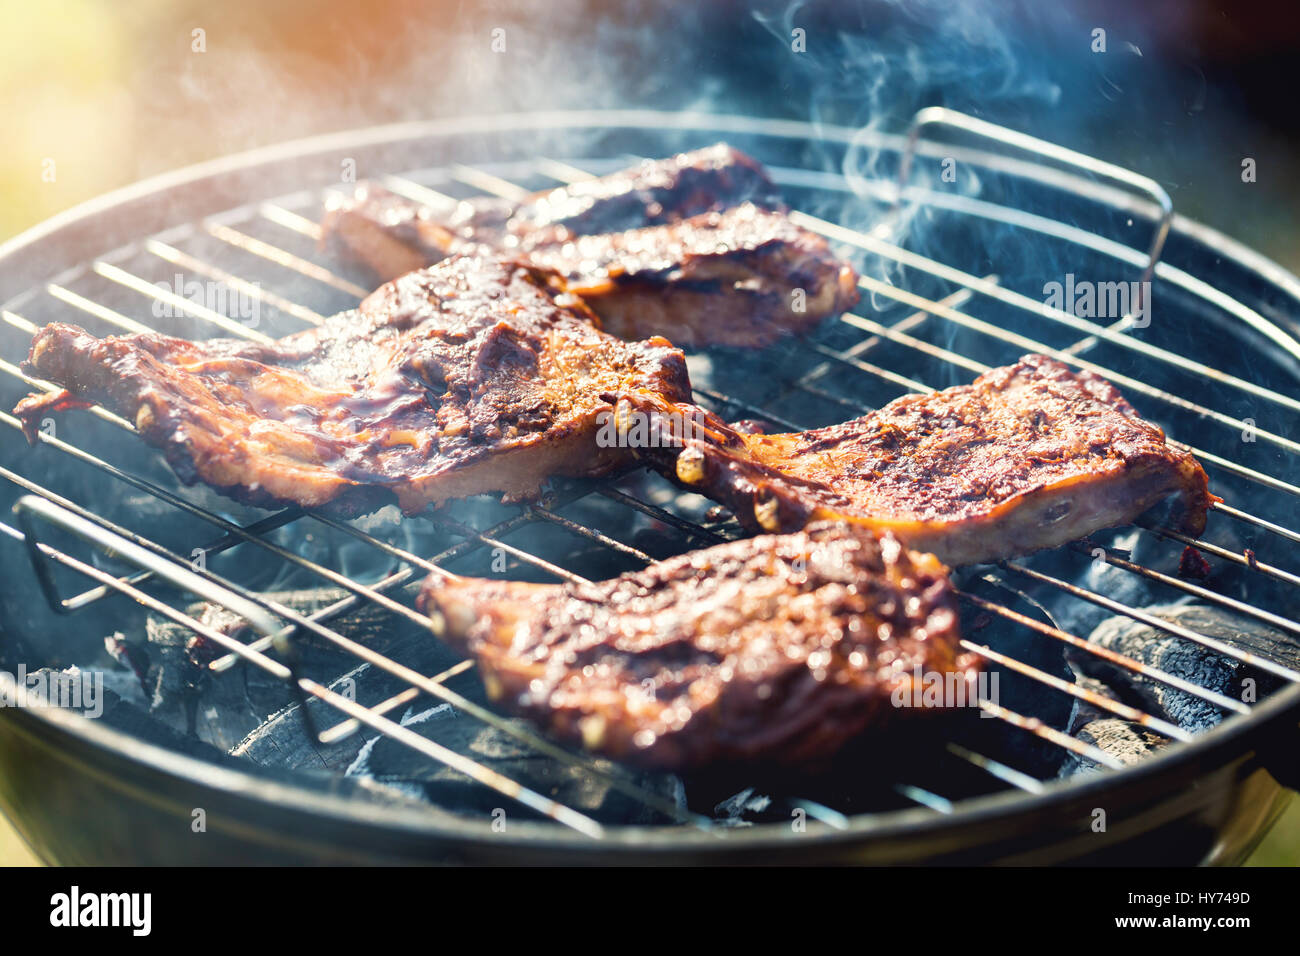 american barbecue - preparing beef ribs on charcoal grill Stock Photo